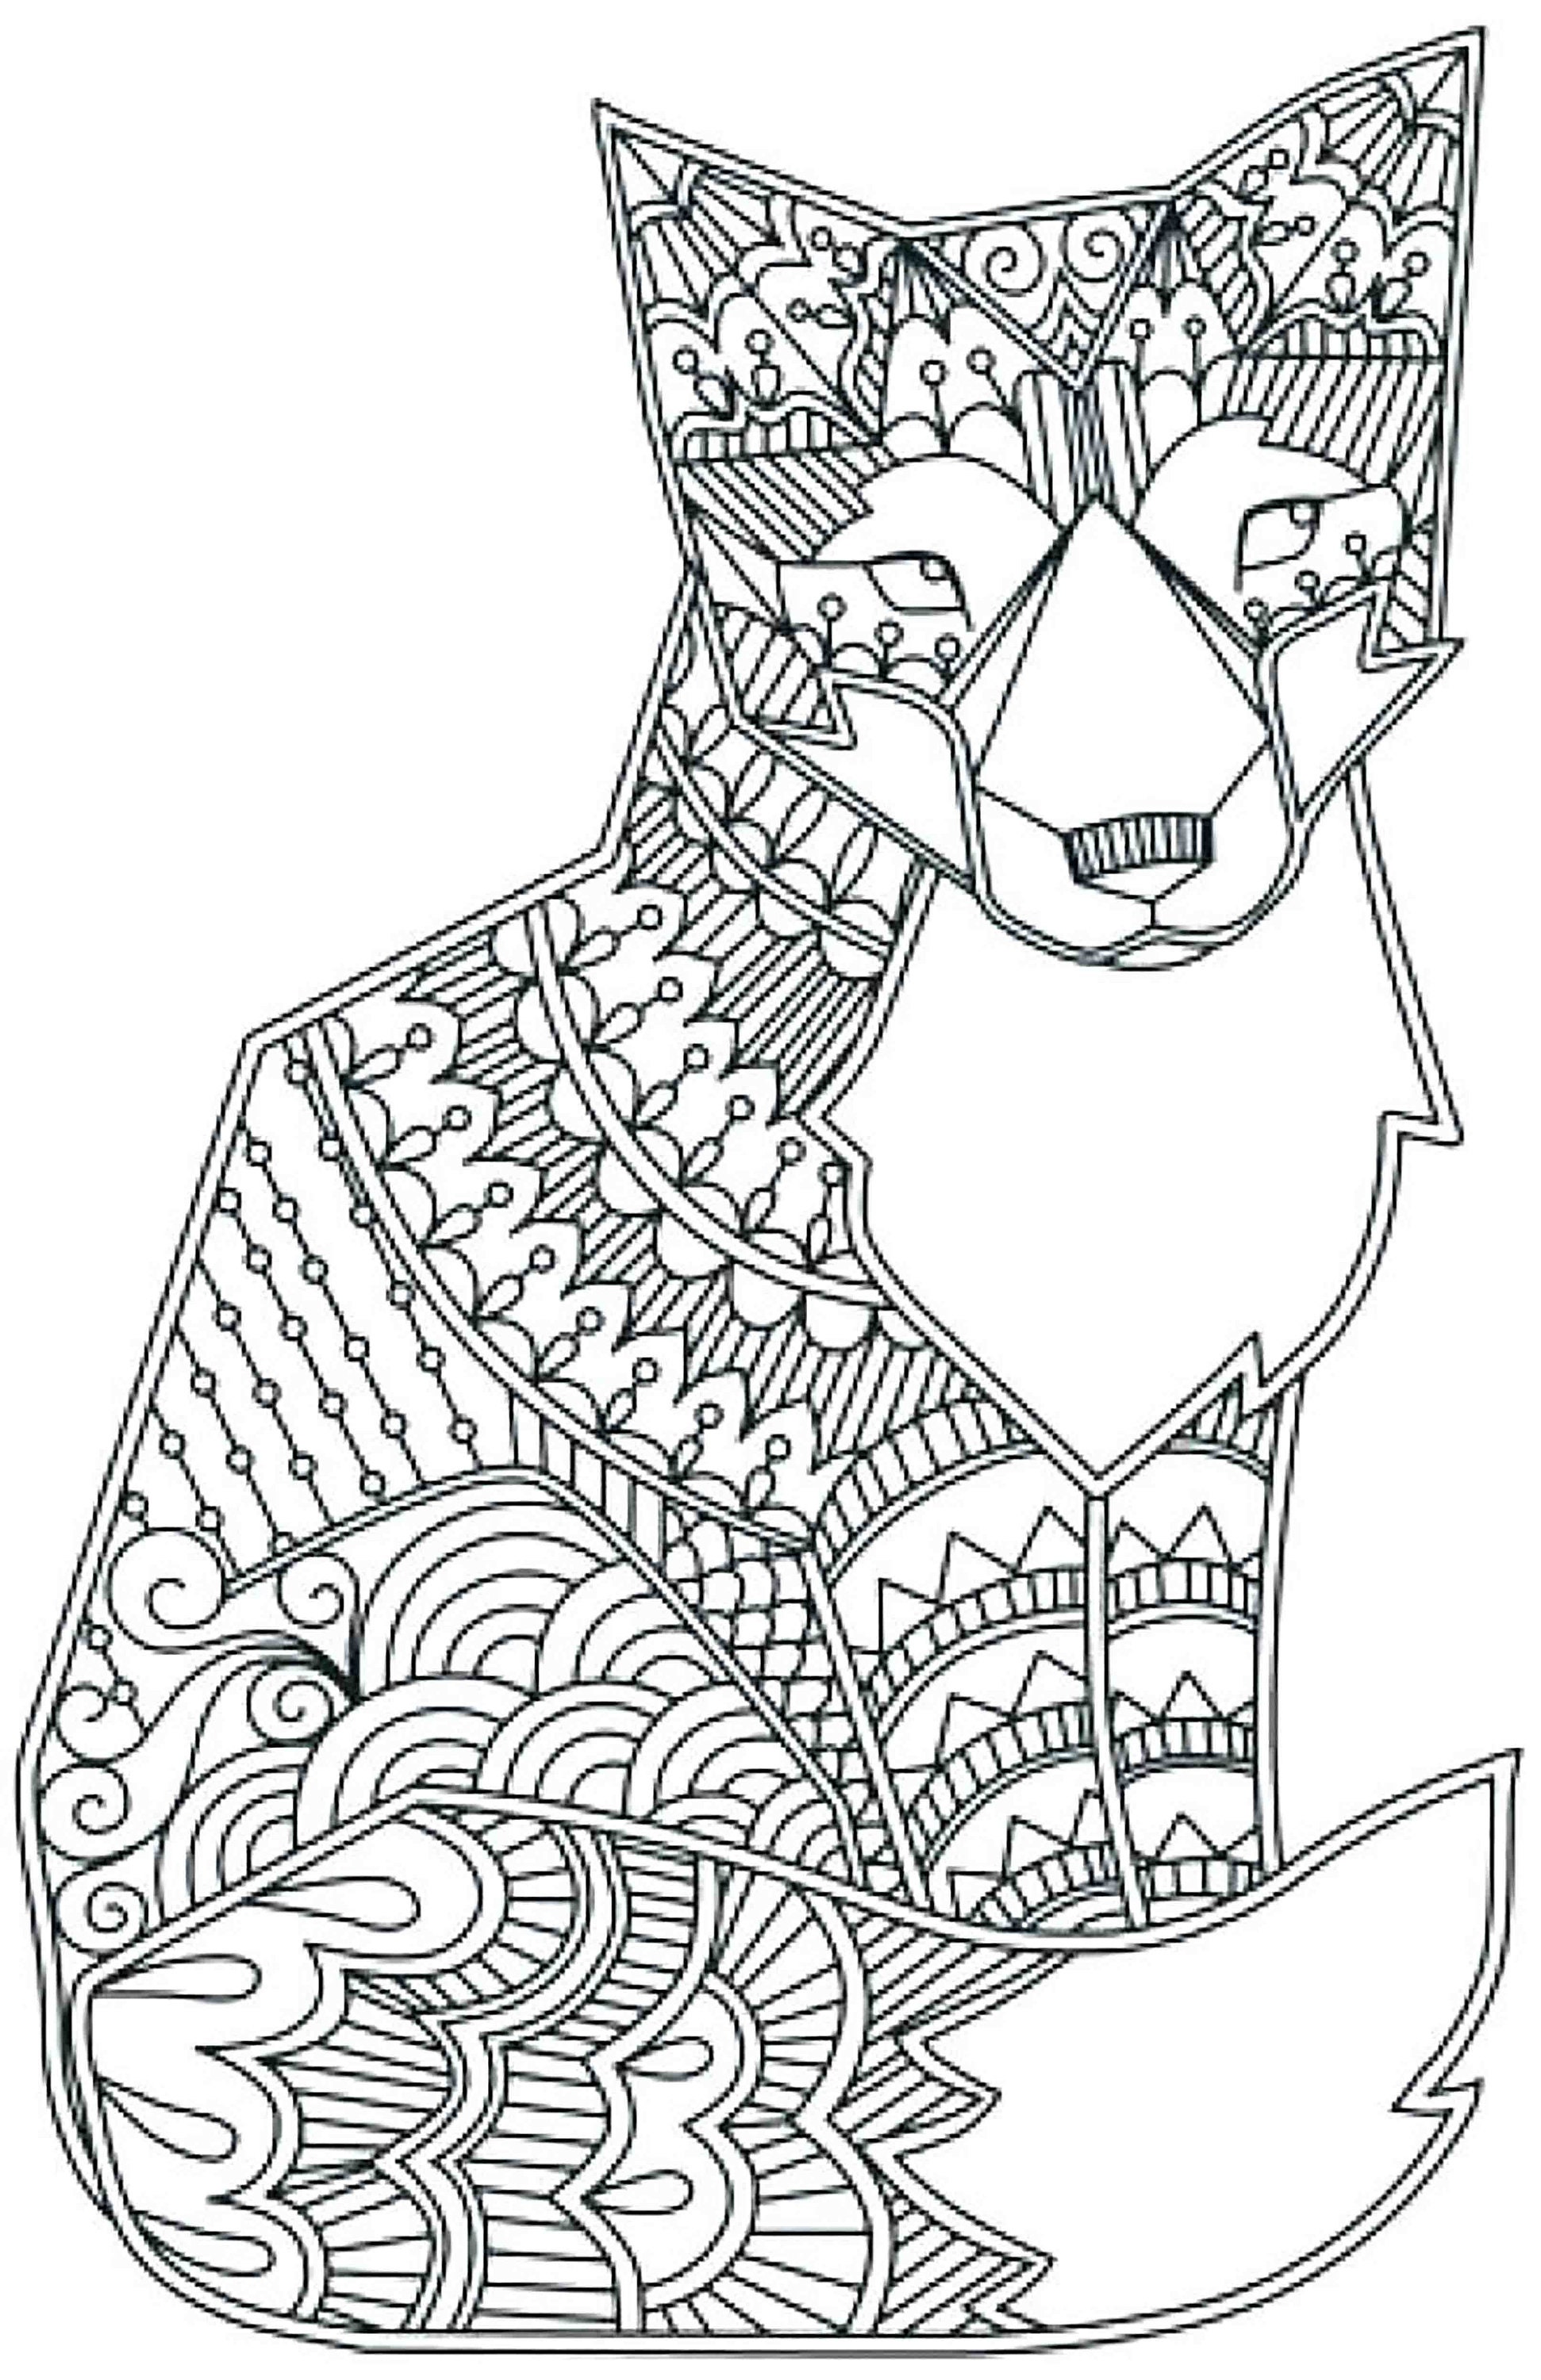 Hard animals coloring pages design